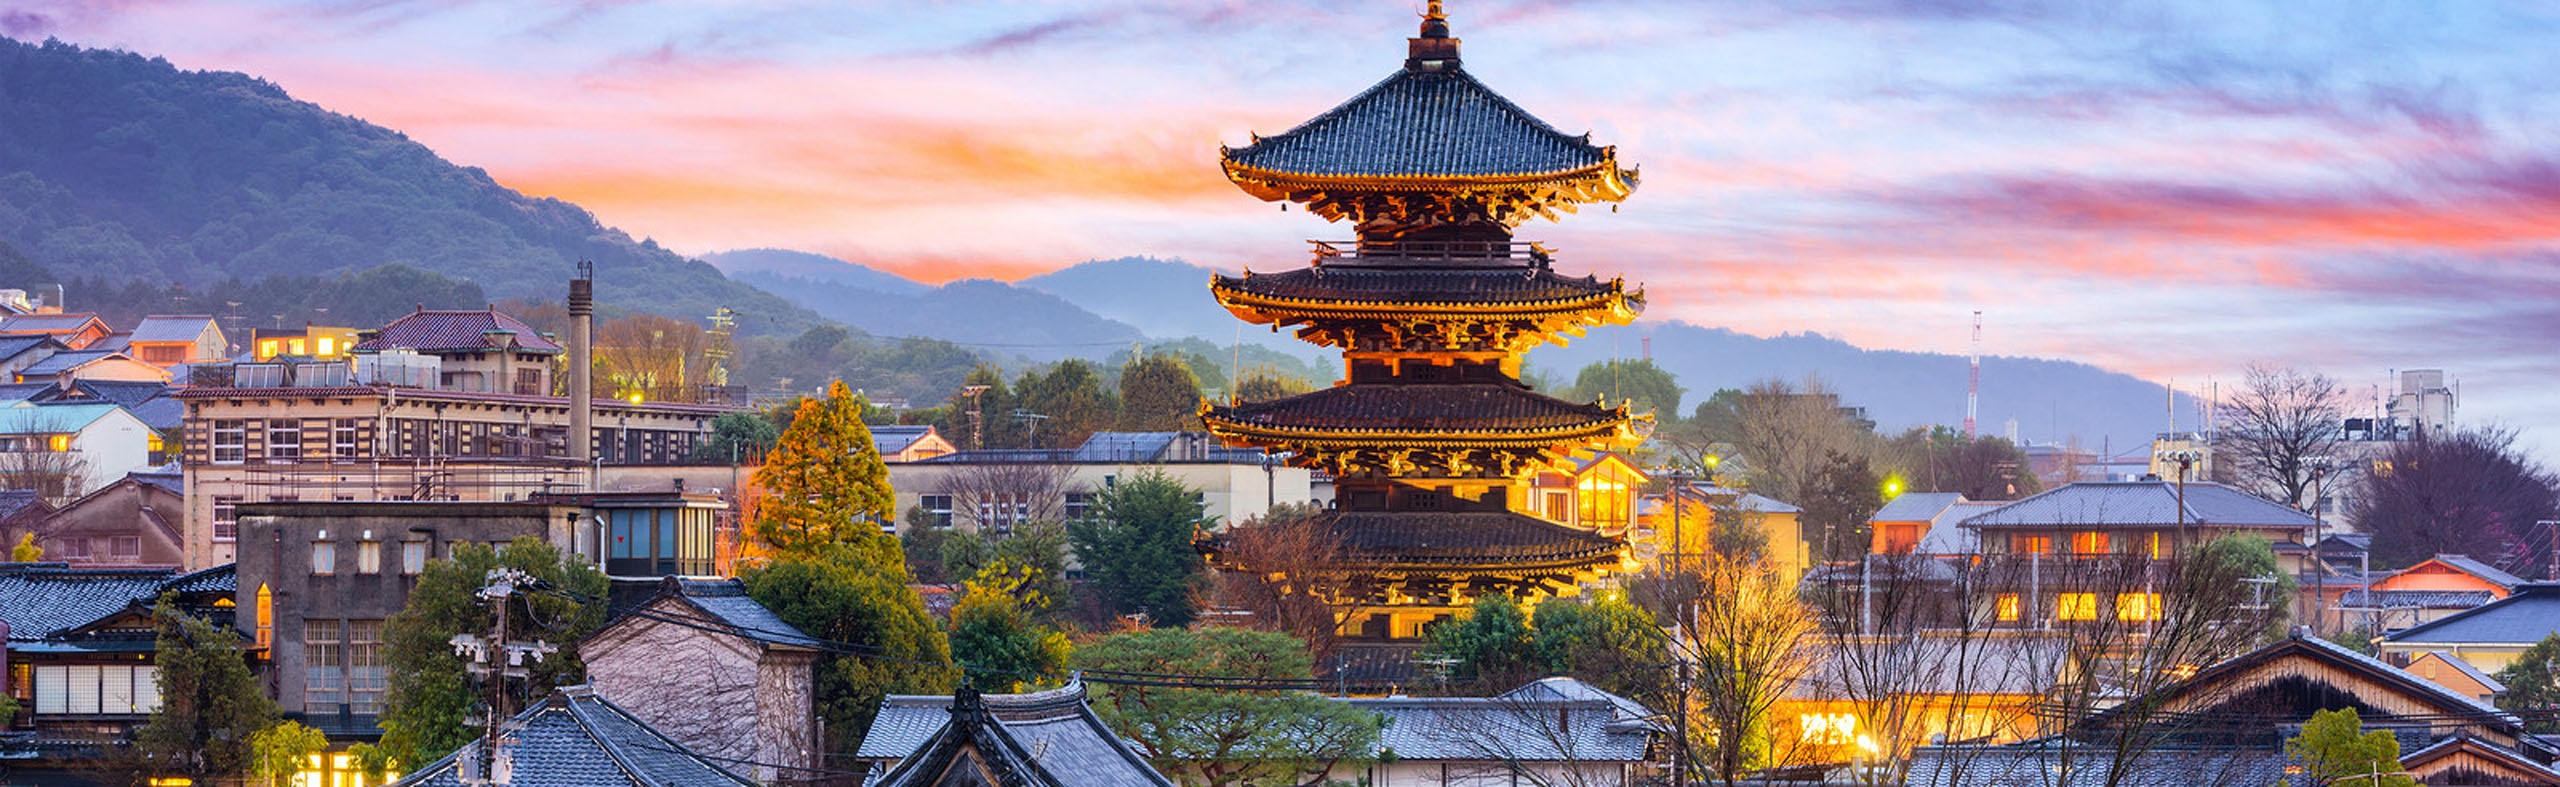 Top 9 Most Beautiful Destinations in Japan